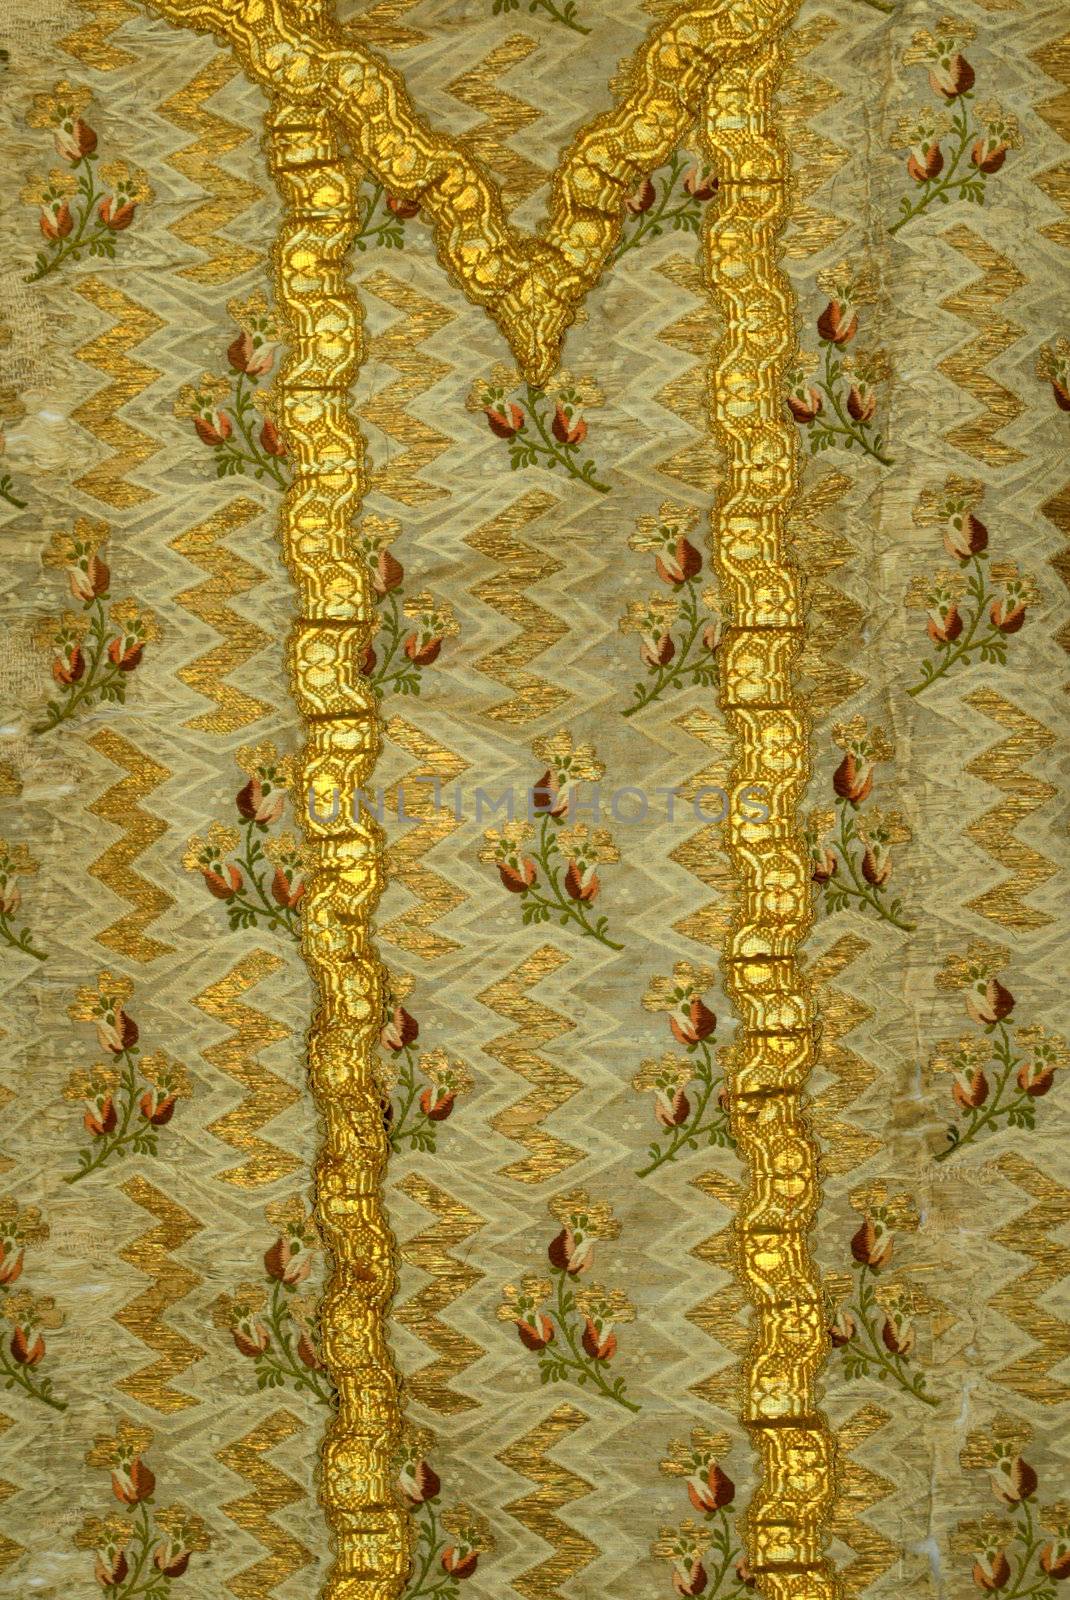 Golden embroidered Church vestments